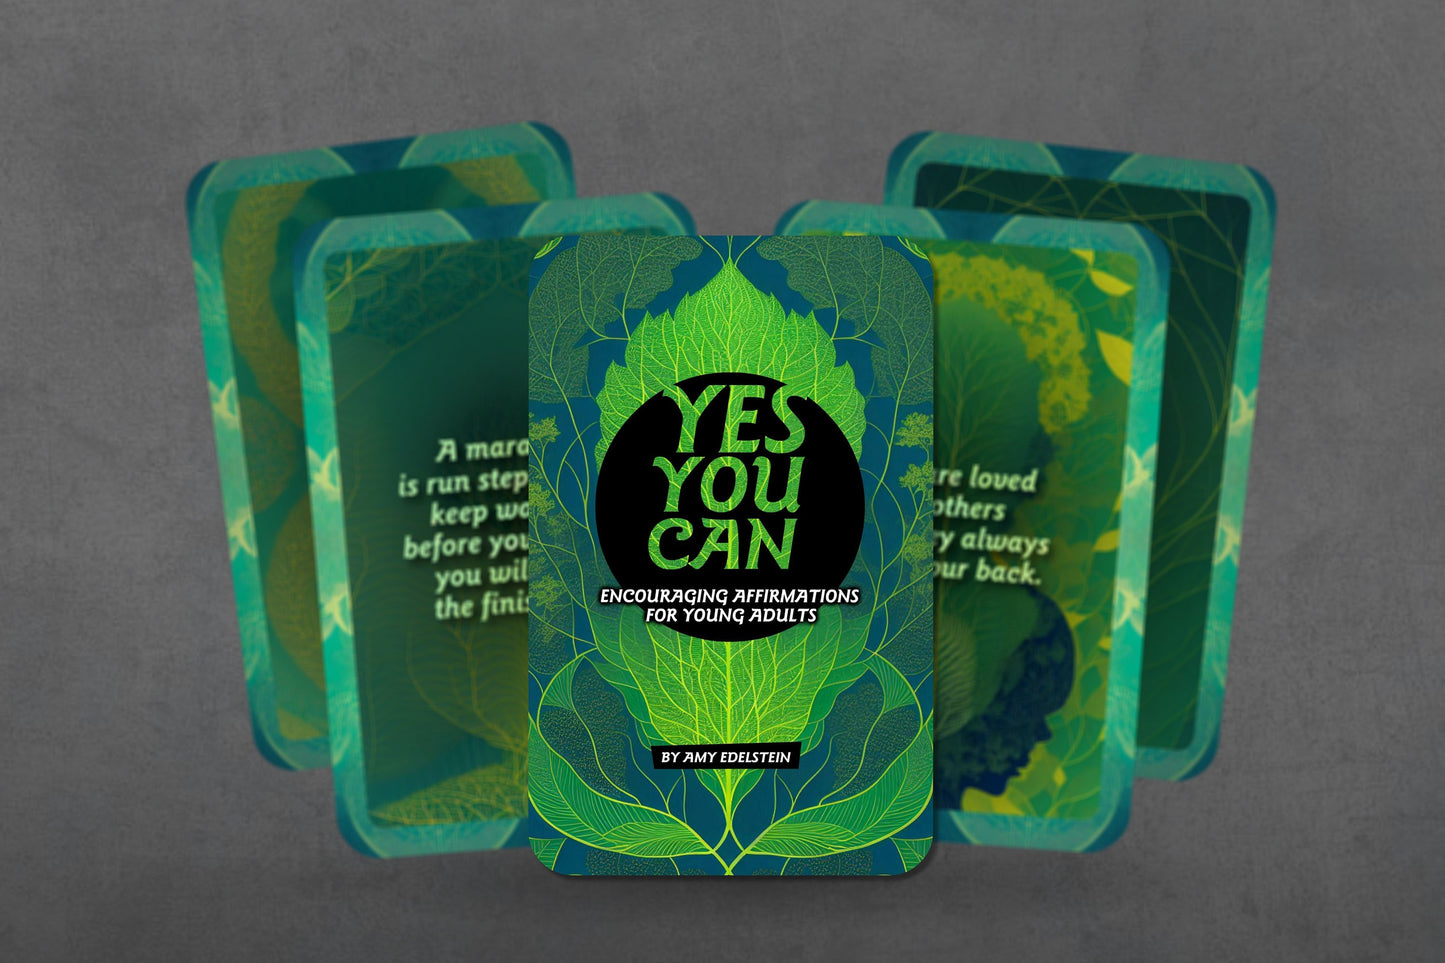 yes you can! - Encouraging Affirmations for Young Adults - By Amy Edelstein